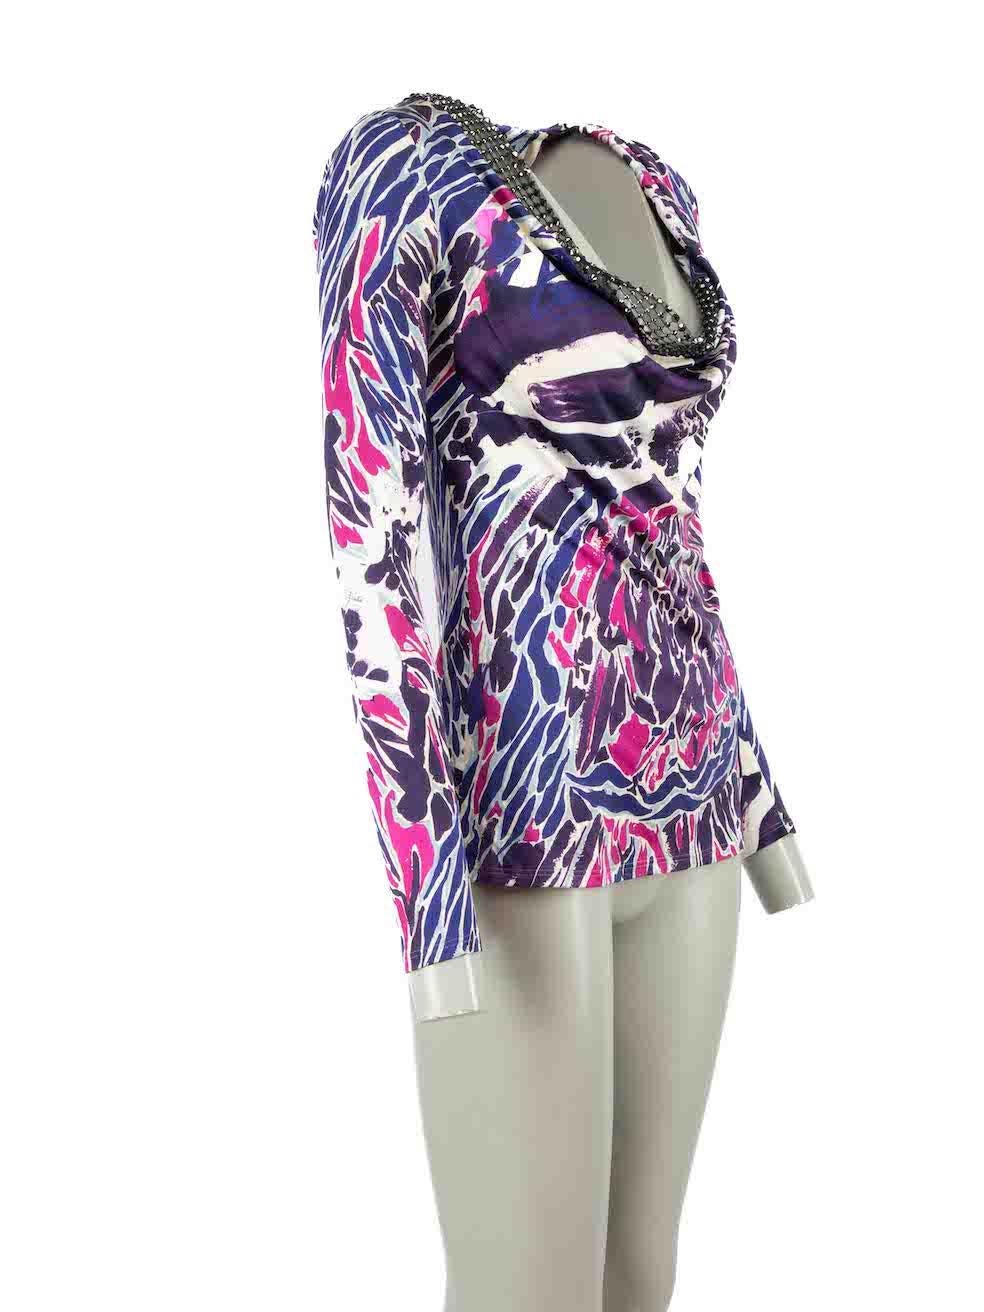 CONDITION is Very good. Hardly any visible wear to top is evident on this used Emilio Pucci designer resale item.

 Details
 Violet
 Silk
 Top
 Abstract pattern
 Crystal embellished neck
 Long sleeves
 Wide neck

 Made in Italy
 
 Composition: 90%